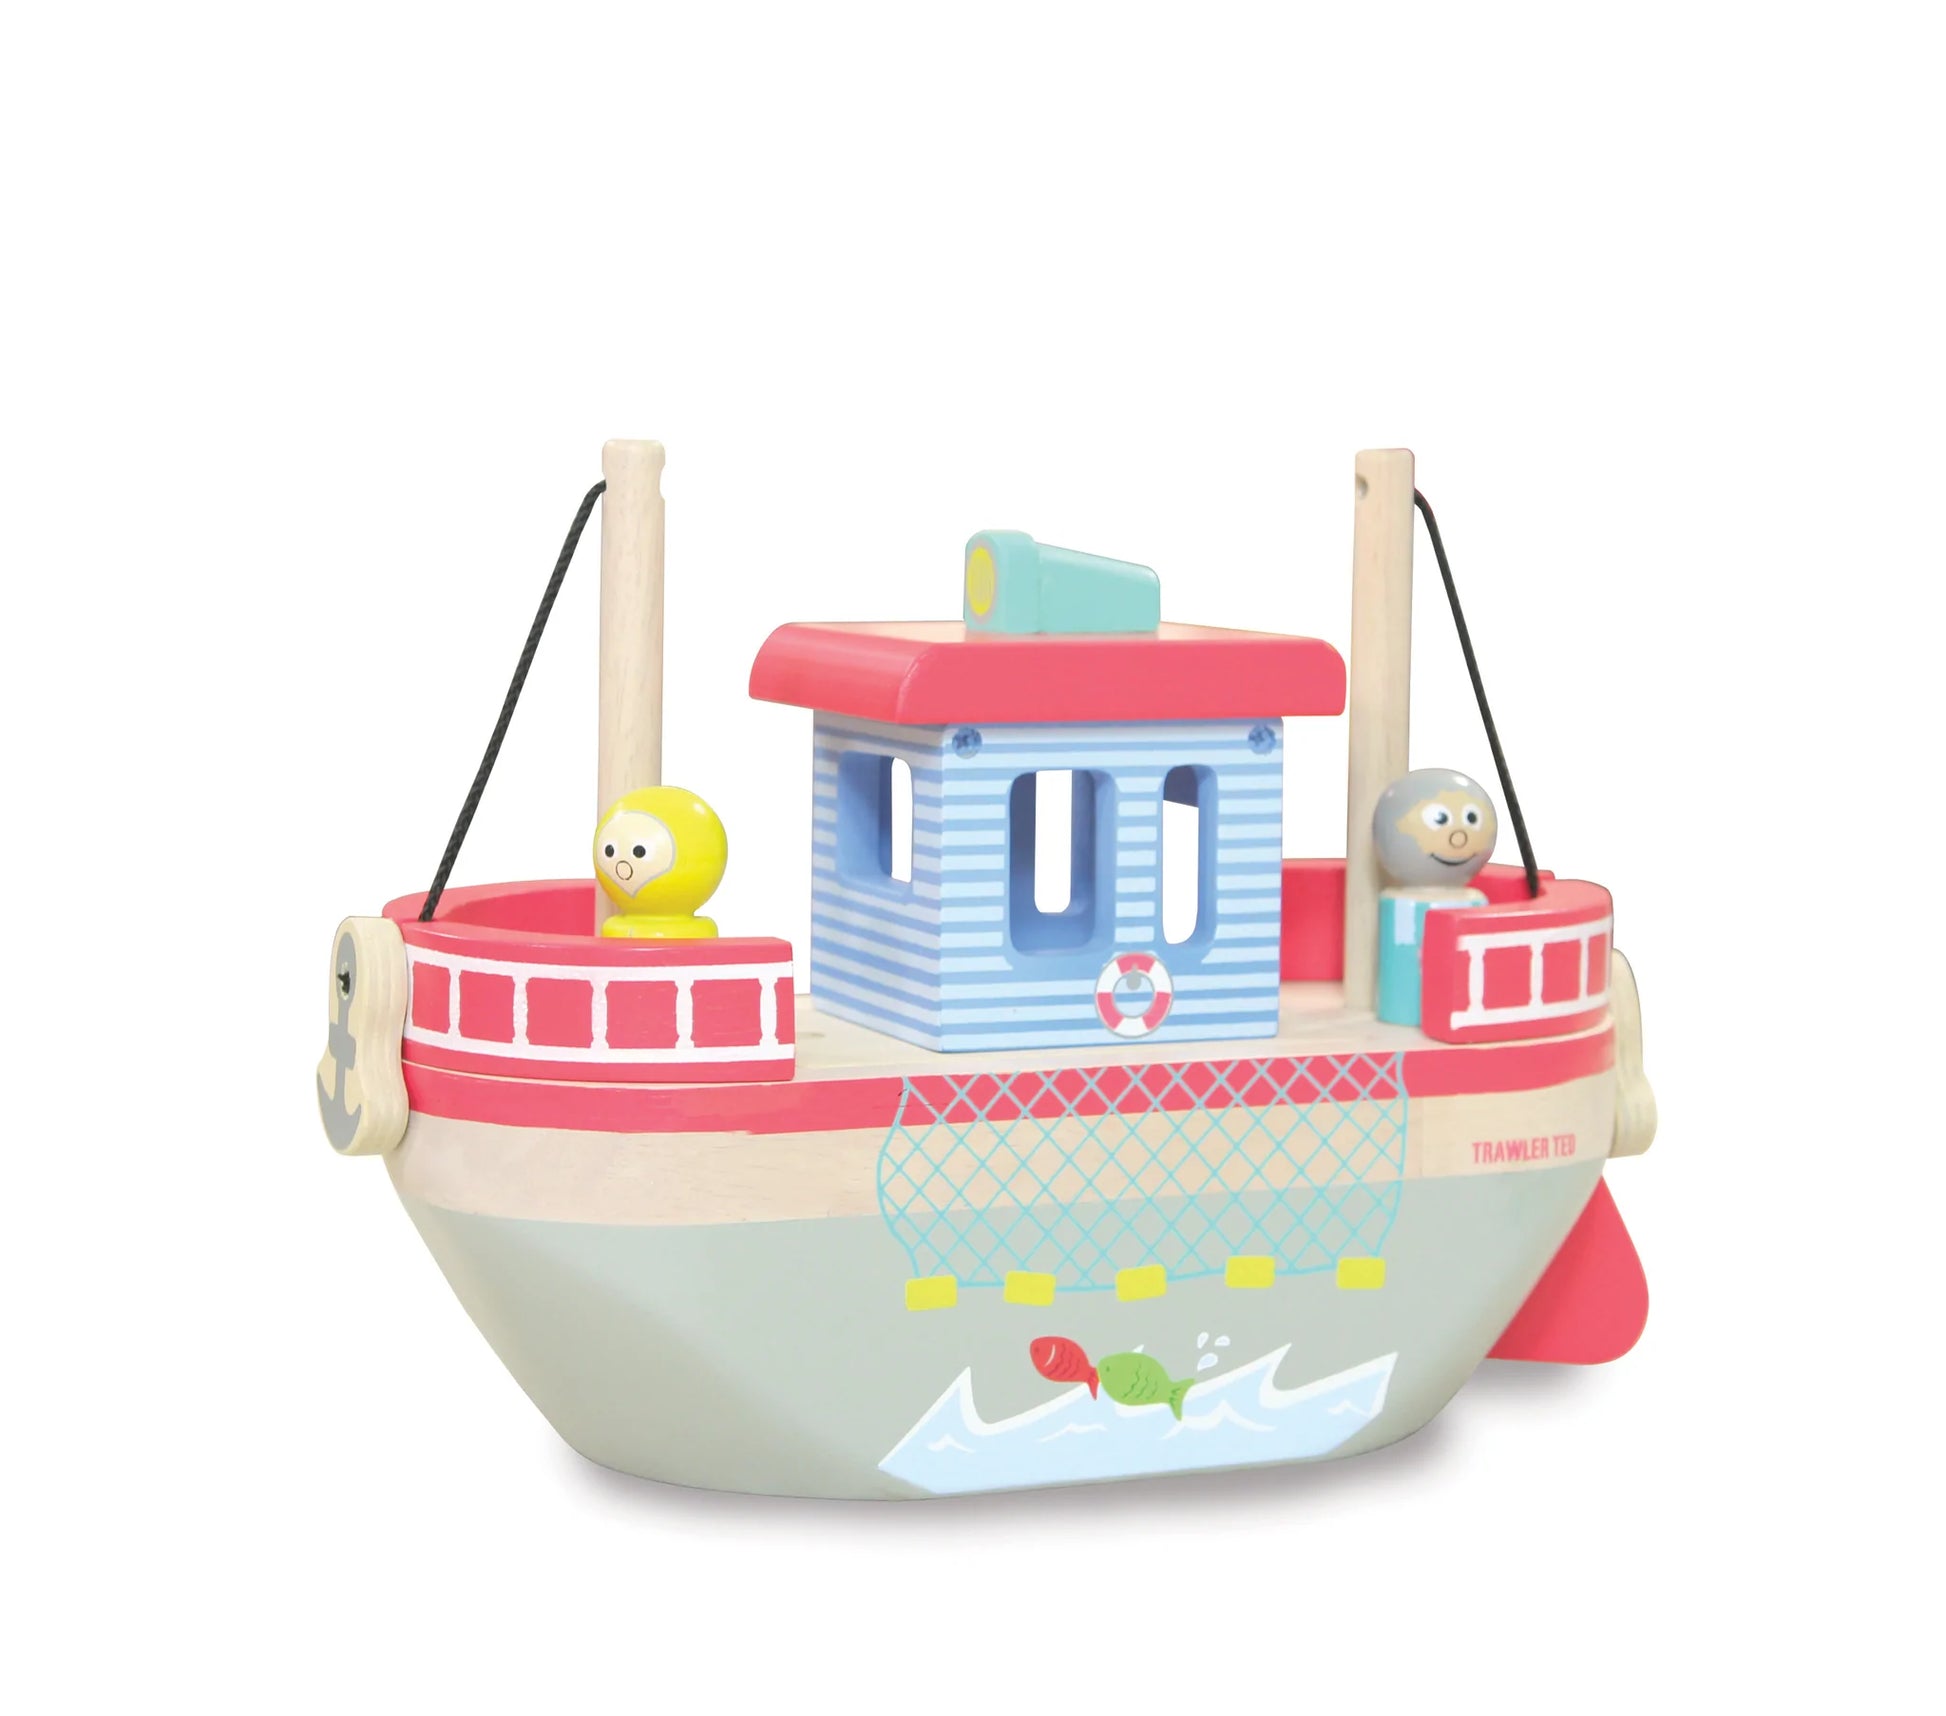 indigo jamm trawler ted and fishing game toy at whippersnappersonline